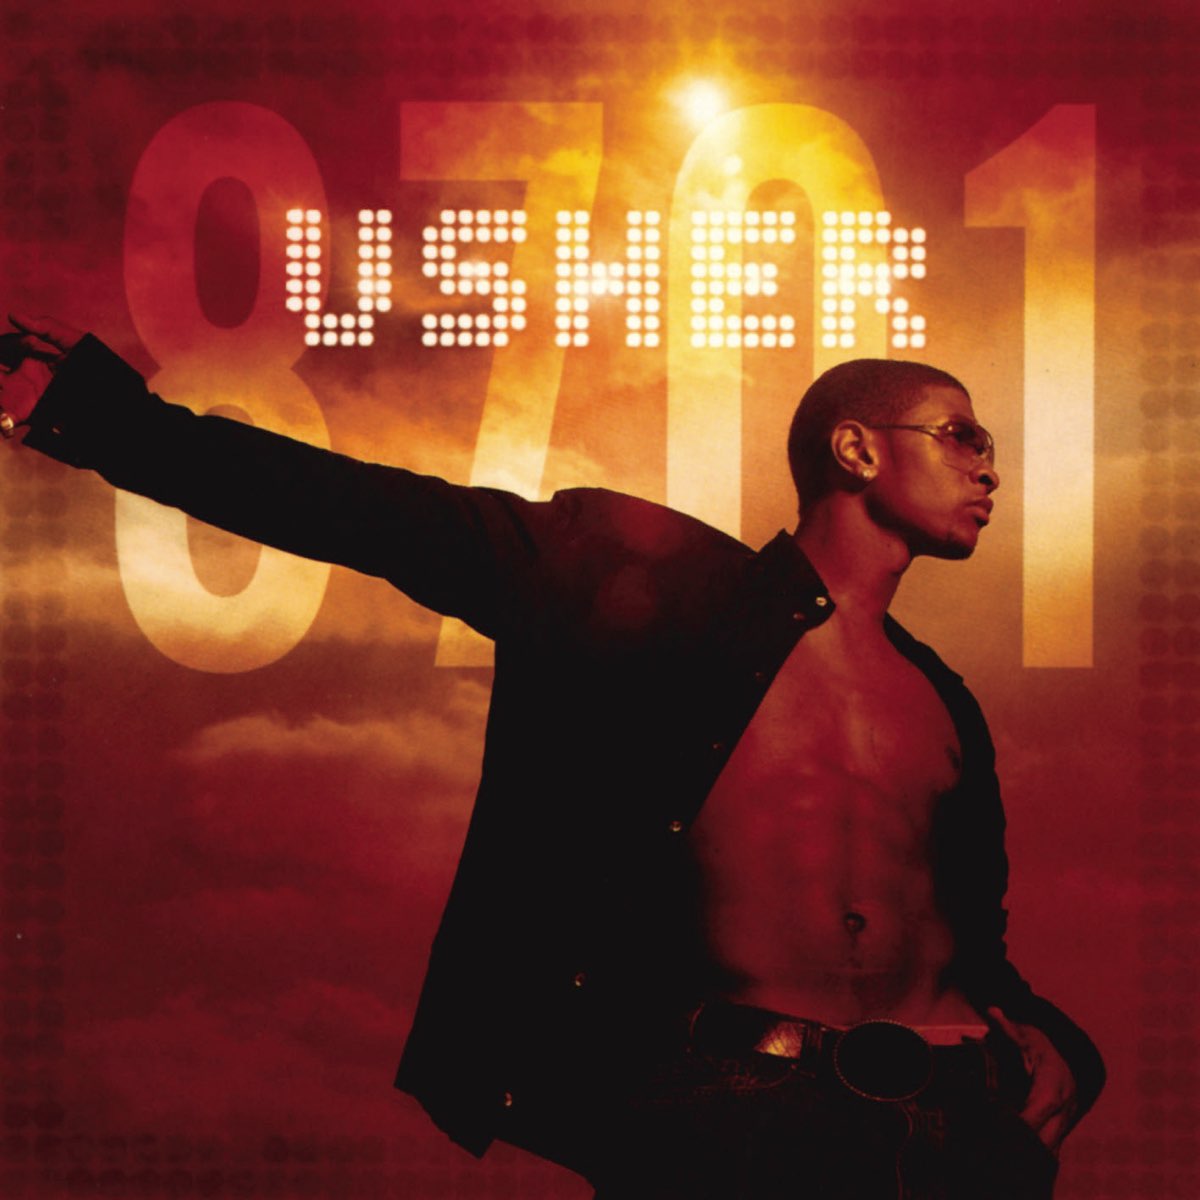 8701 by Usher on Apple Music